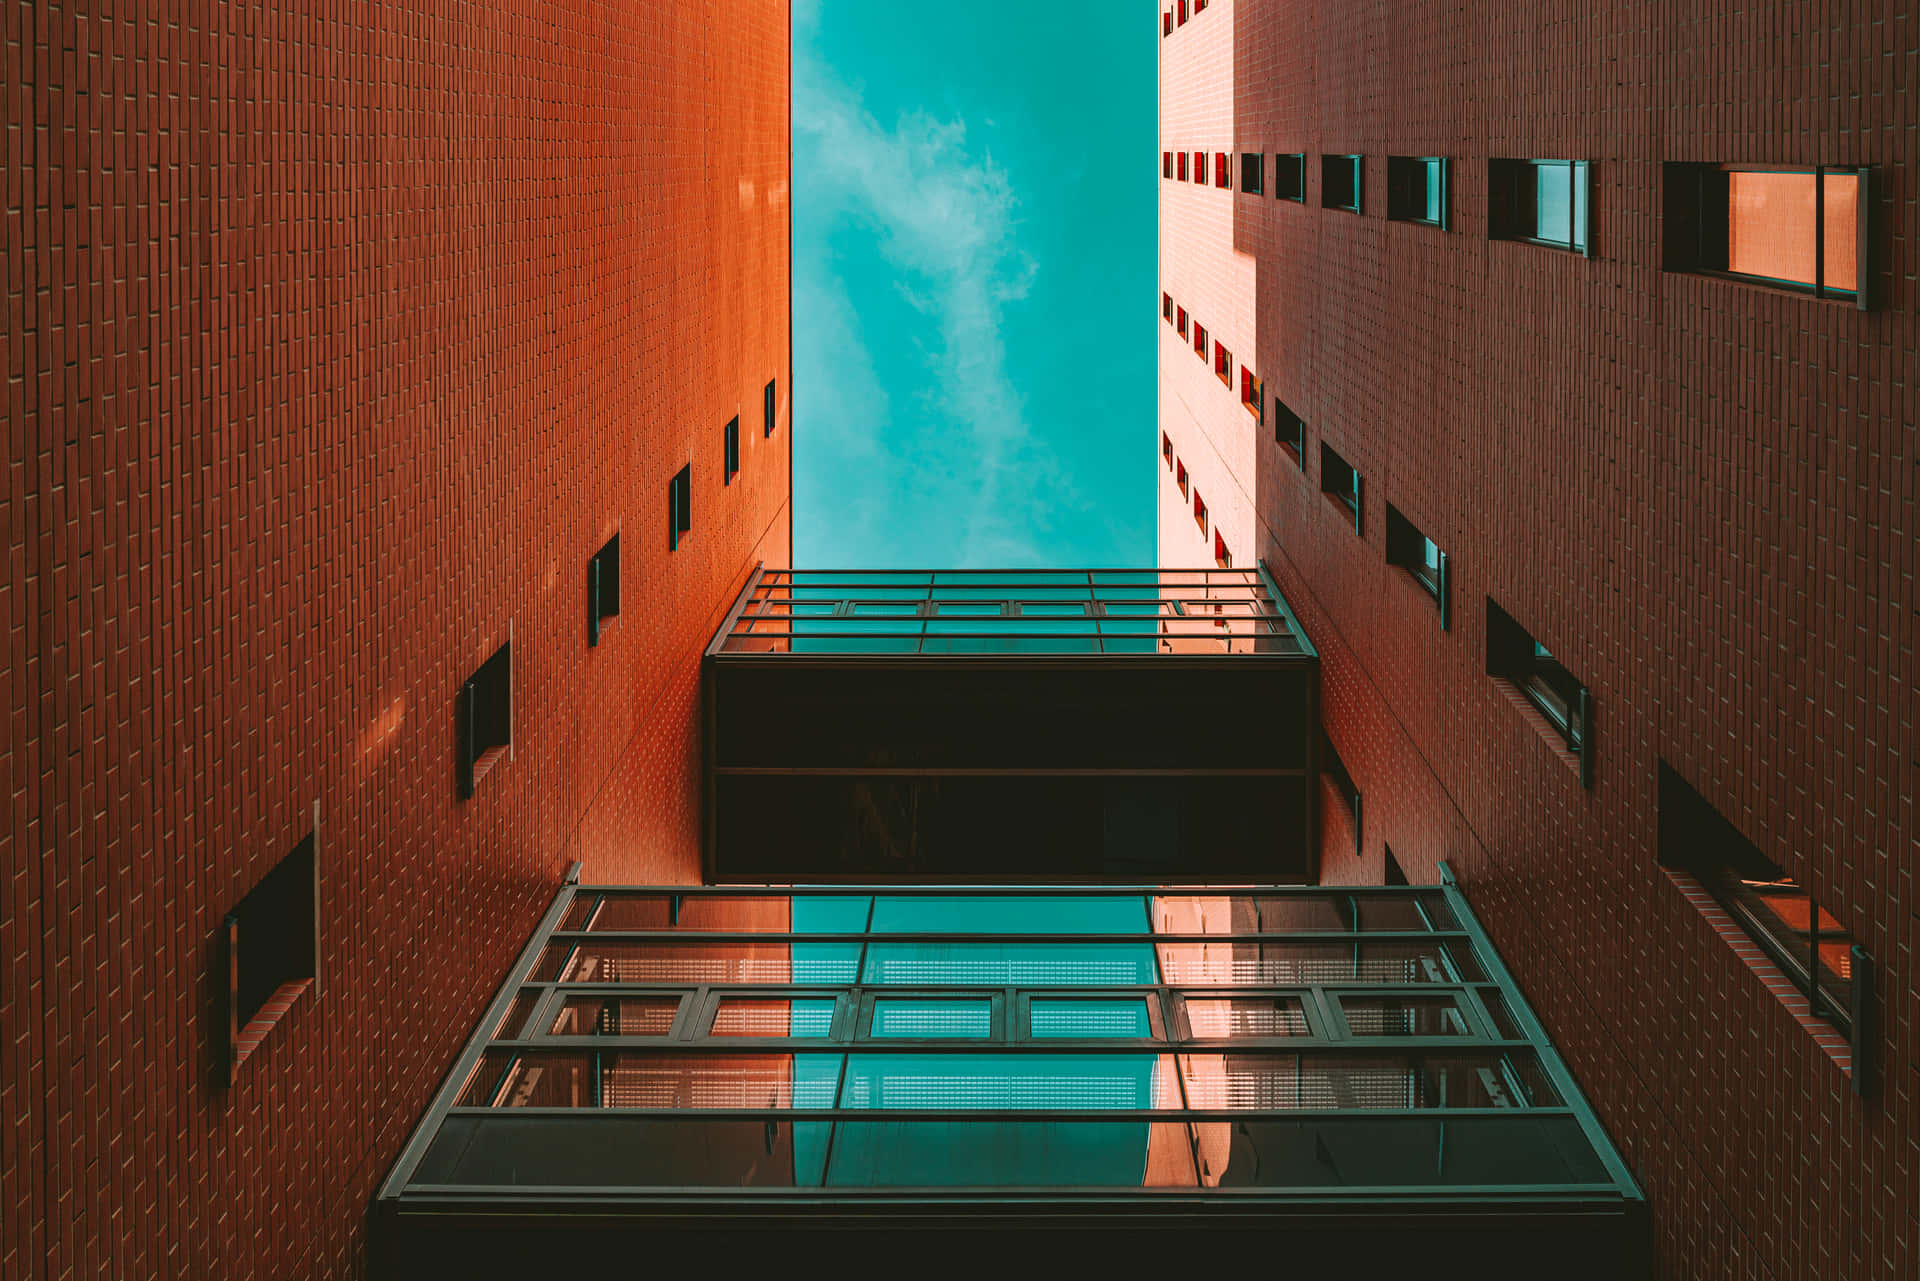 Building And Sky In Orange And Teal Wallpaper